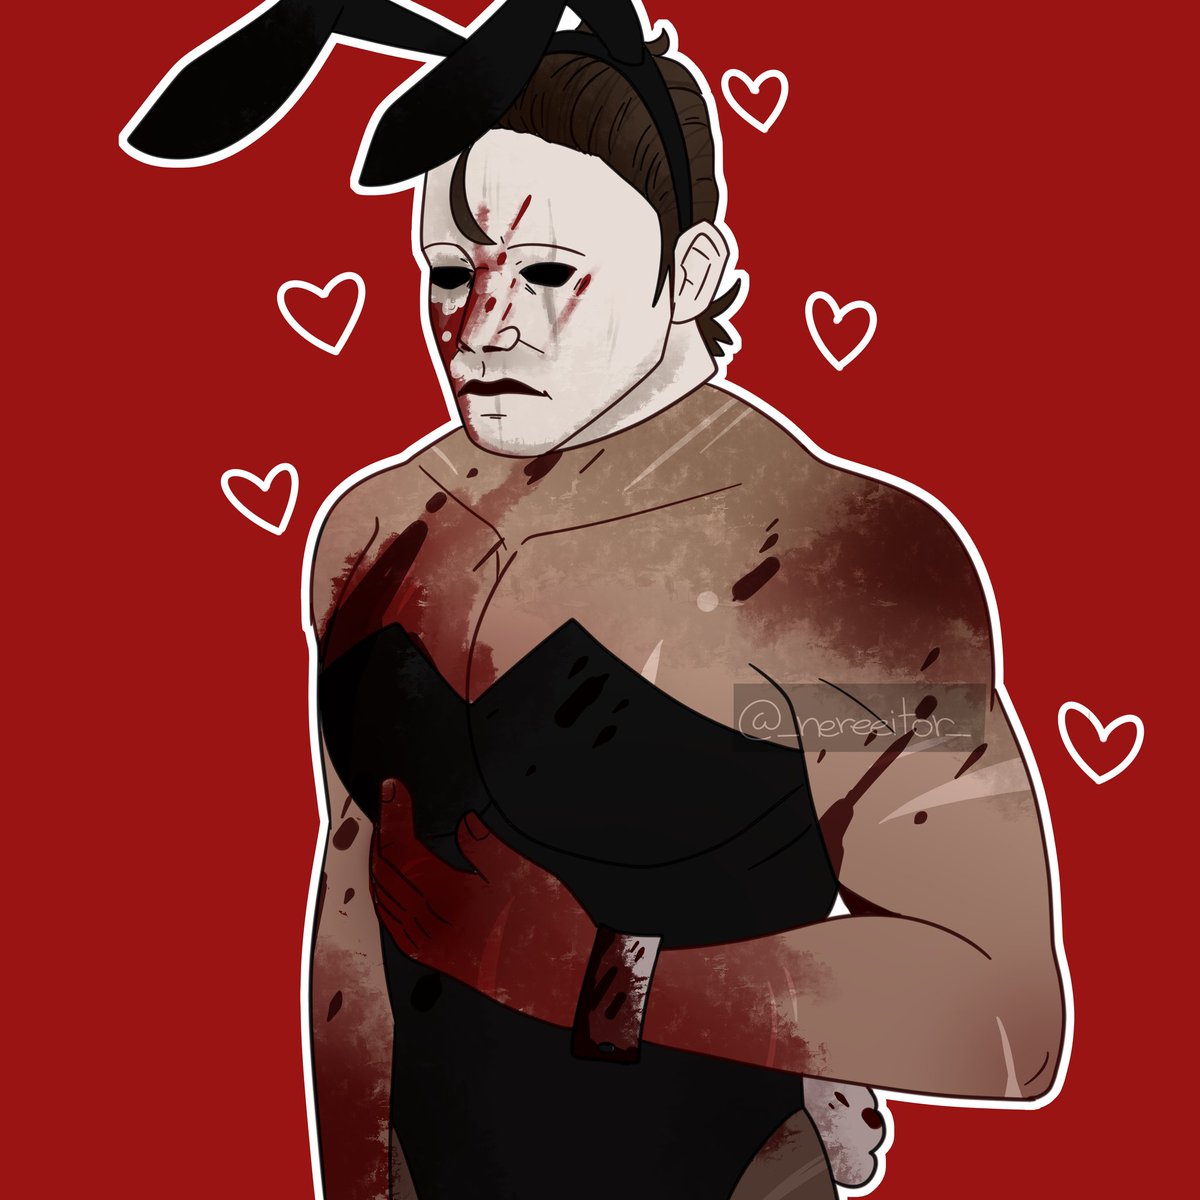 Happy Valentine's Day❤️
As a gift from me to you I give you Ghostface, Trapper and Michael Myers in a Bunny suit <3 
#DeadbyDaylight #DBD #fanart #EvanMacMillan #DannyJohnson #dbdfanart